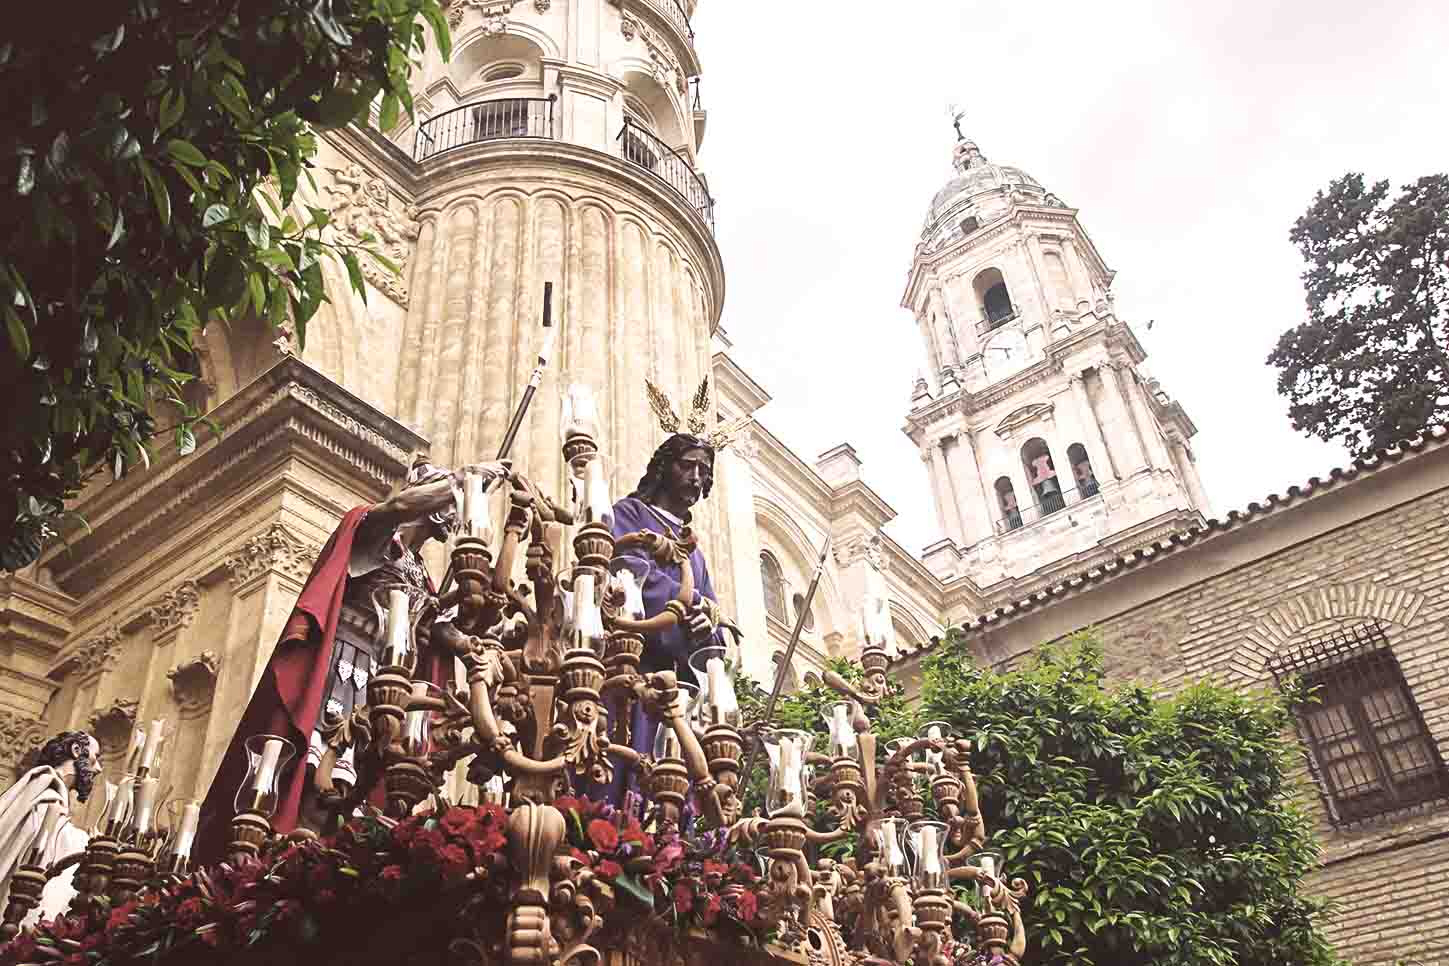 Easter processions in Spain are an intense, moving experience